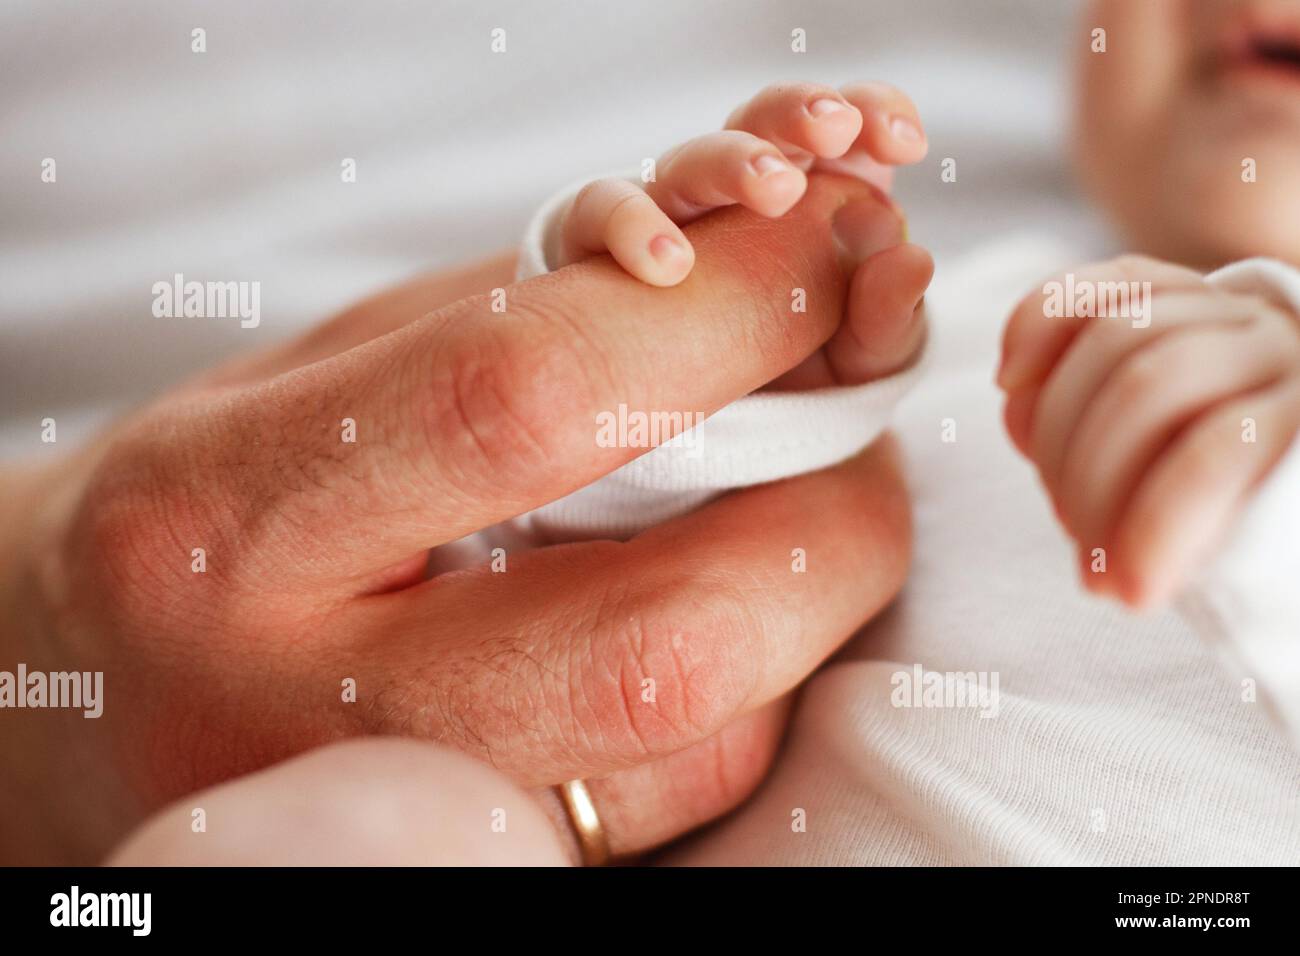 Close up photo of father holding baby hand. New family, care, love and baby protection concept. Stock Photo